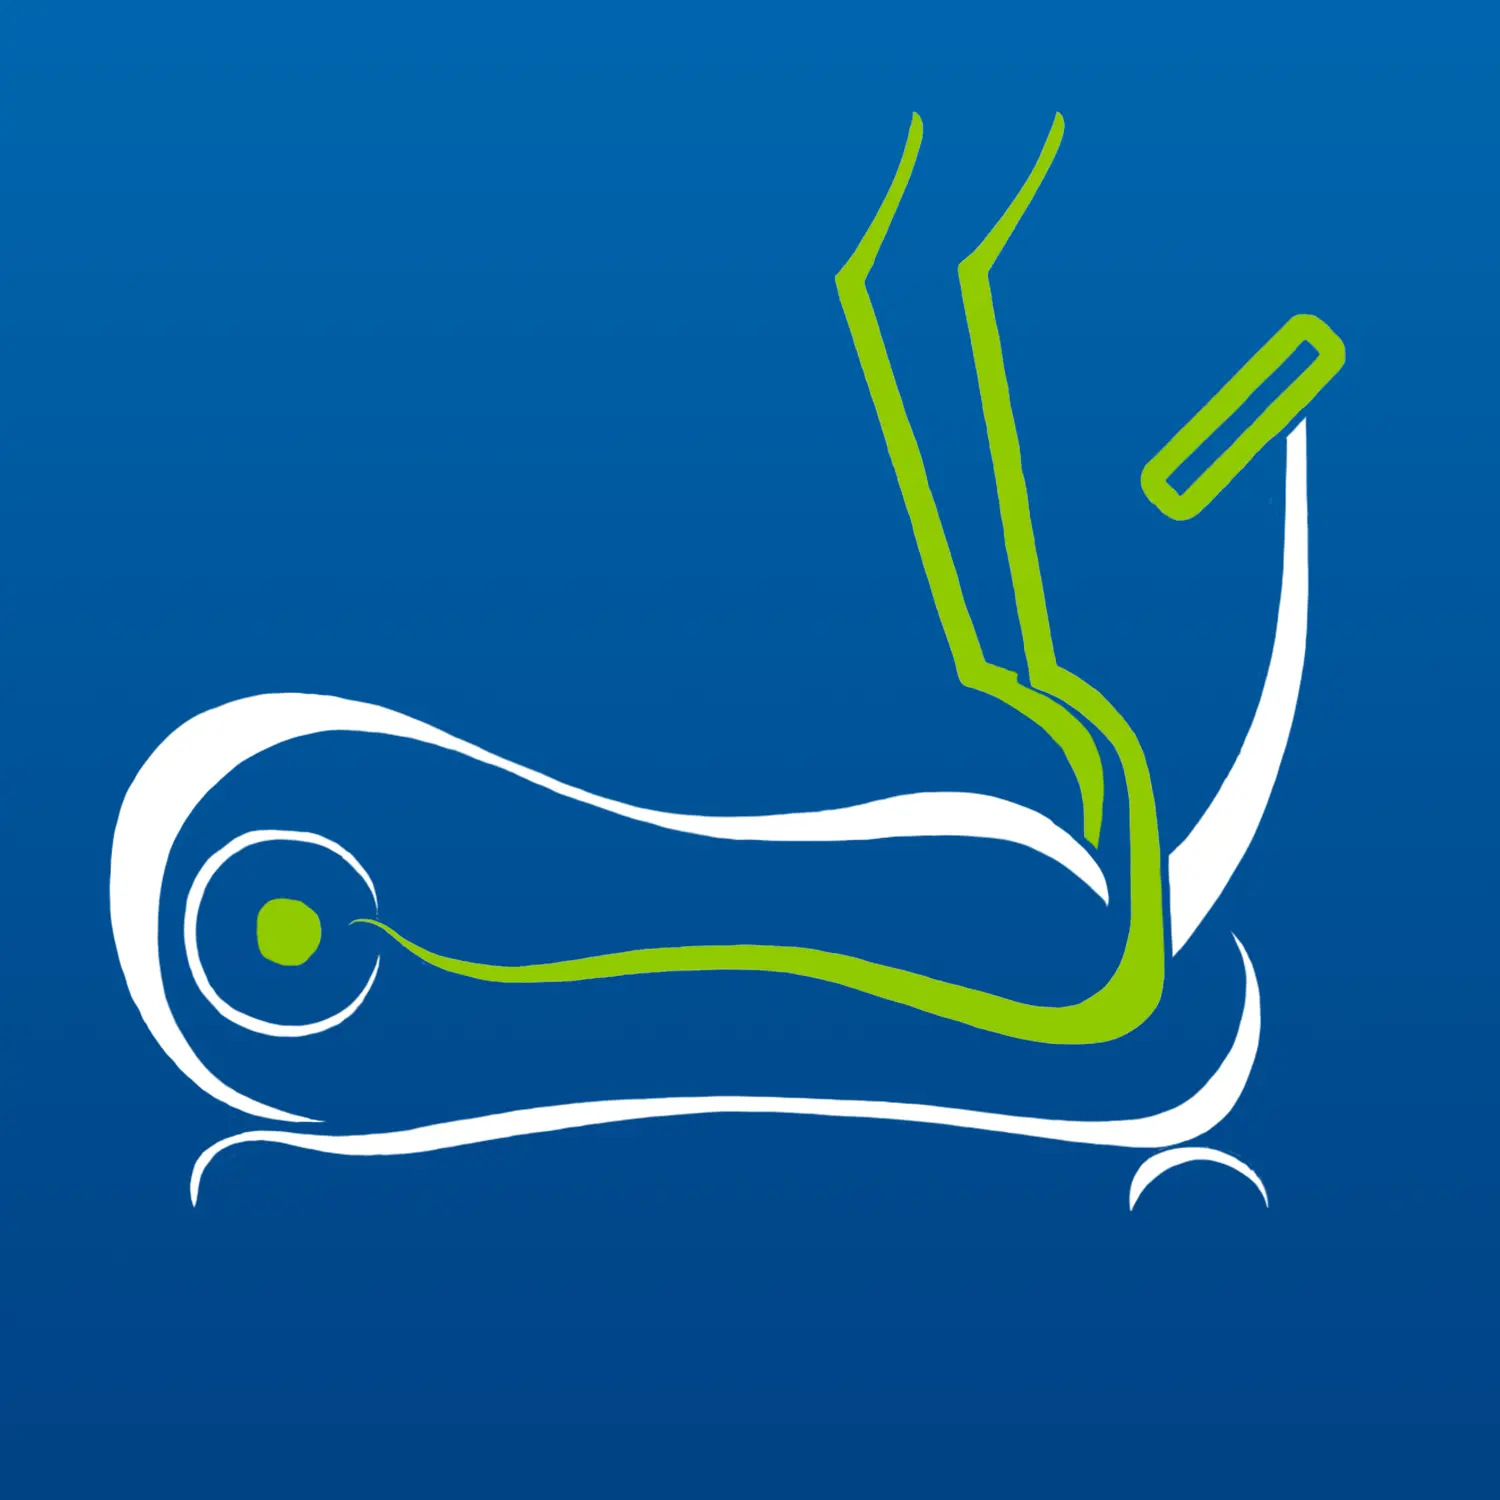 Centaur Physical Therapy Icon represents our top-notch equipment.